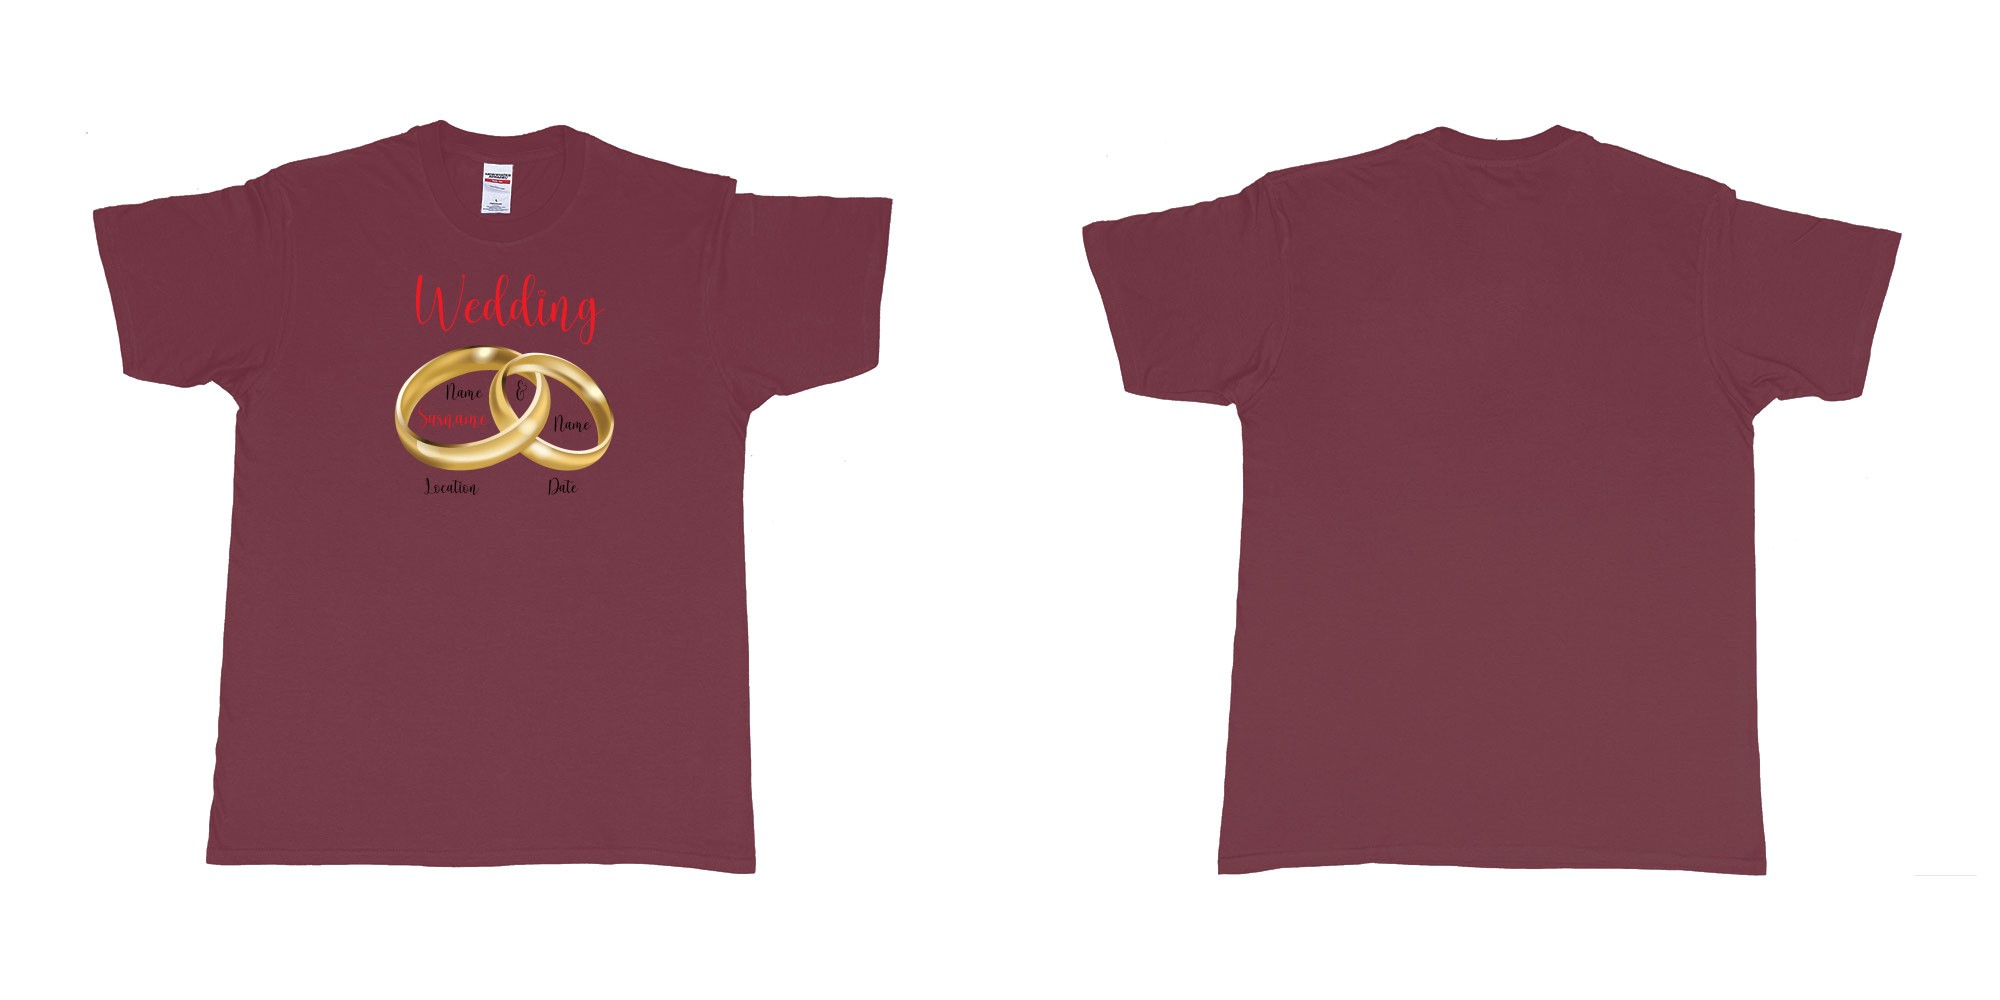 Custom tshirt design wedding rings in fabric color marron choice your own text made in Bali by The Pirate Way